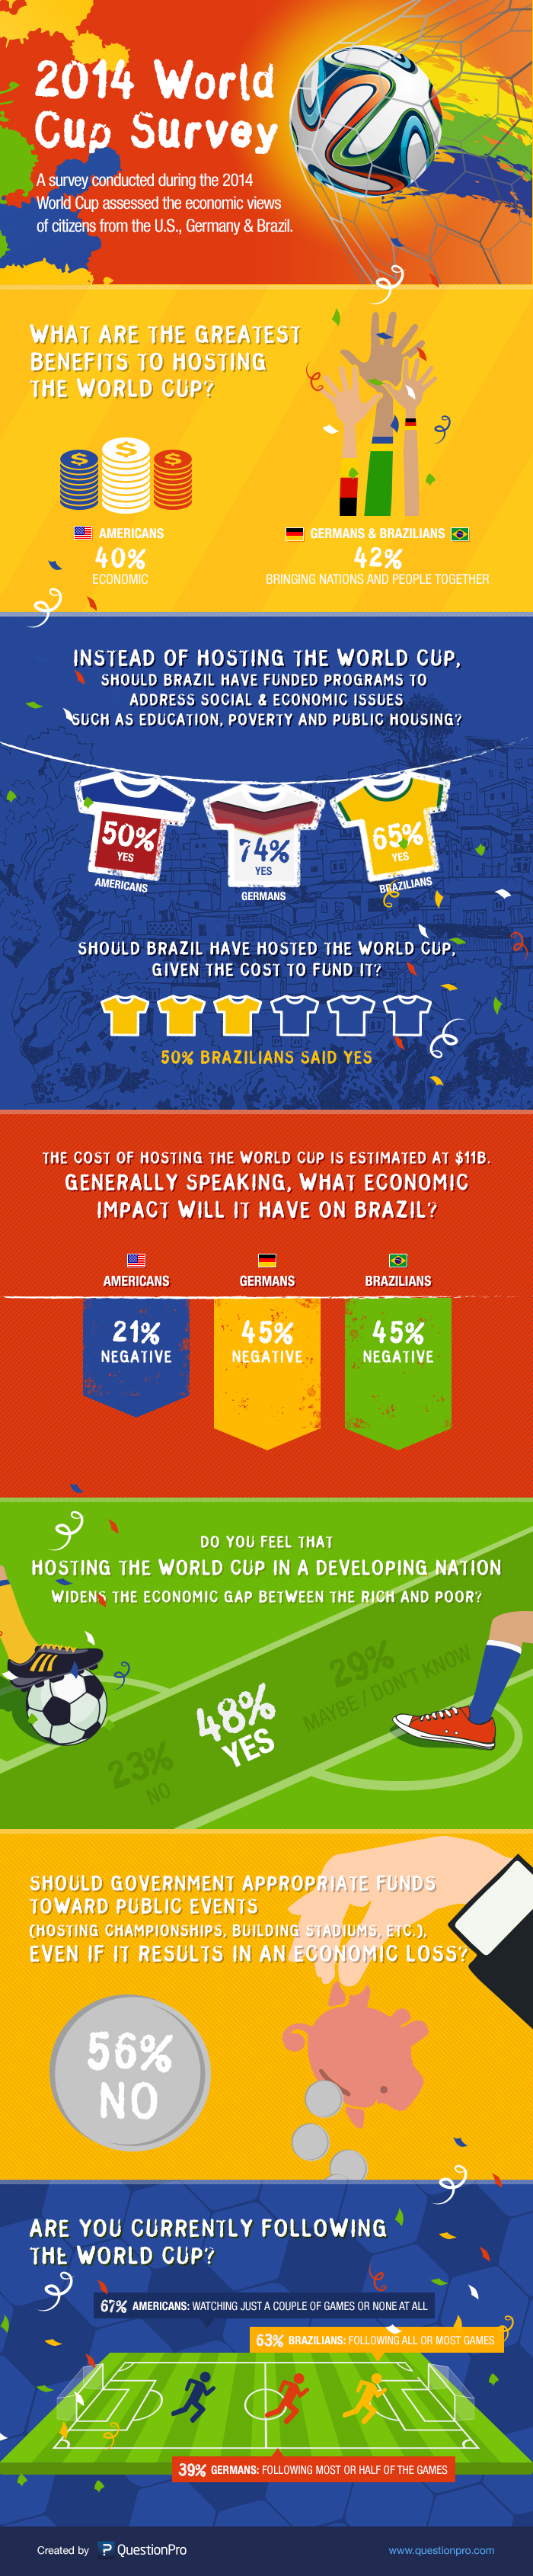 2014 World Cup Survey Results: Americans View Economic Gains as ...